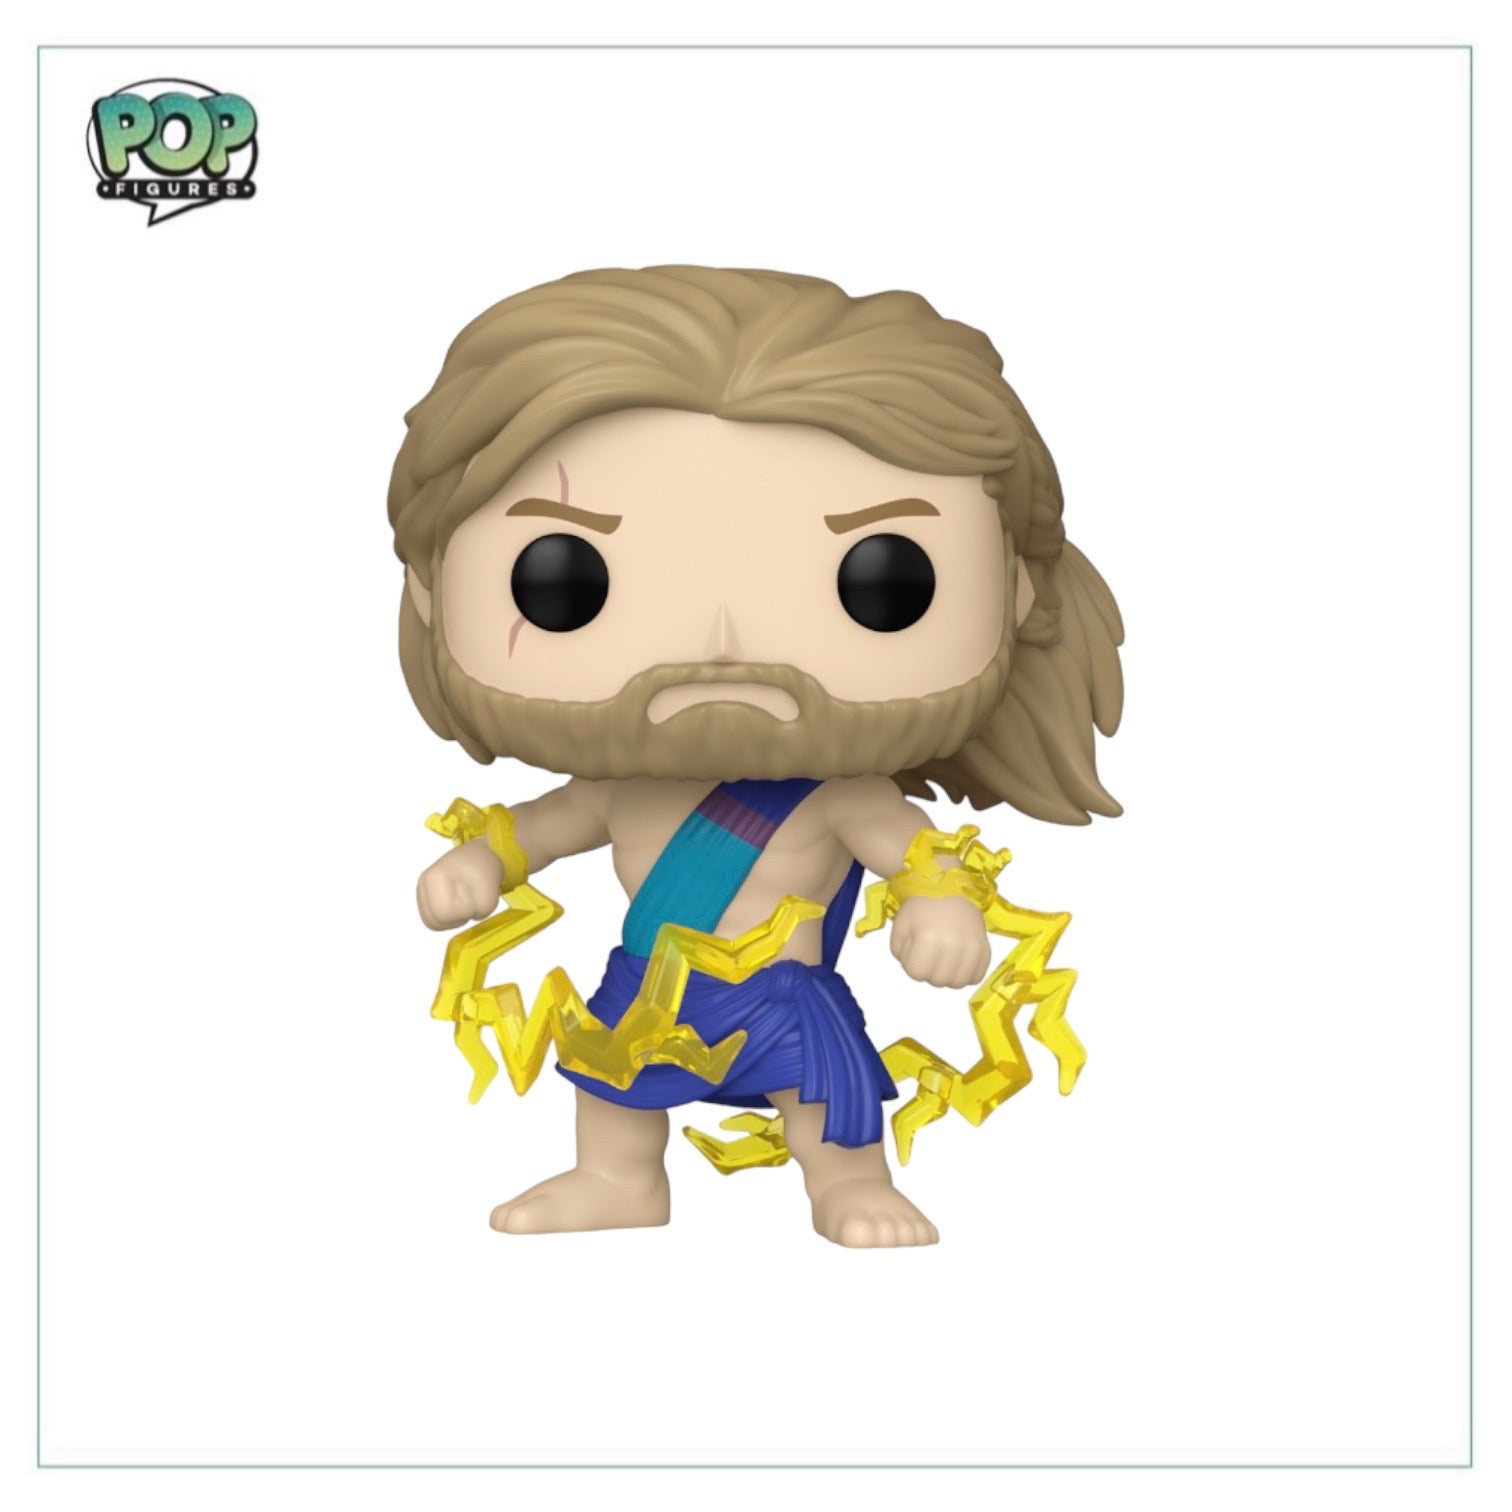 Thor #1261 Funko Pop! - Thor Love and Thunder - SDCC 2023 Shared Exclusive